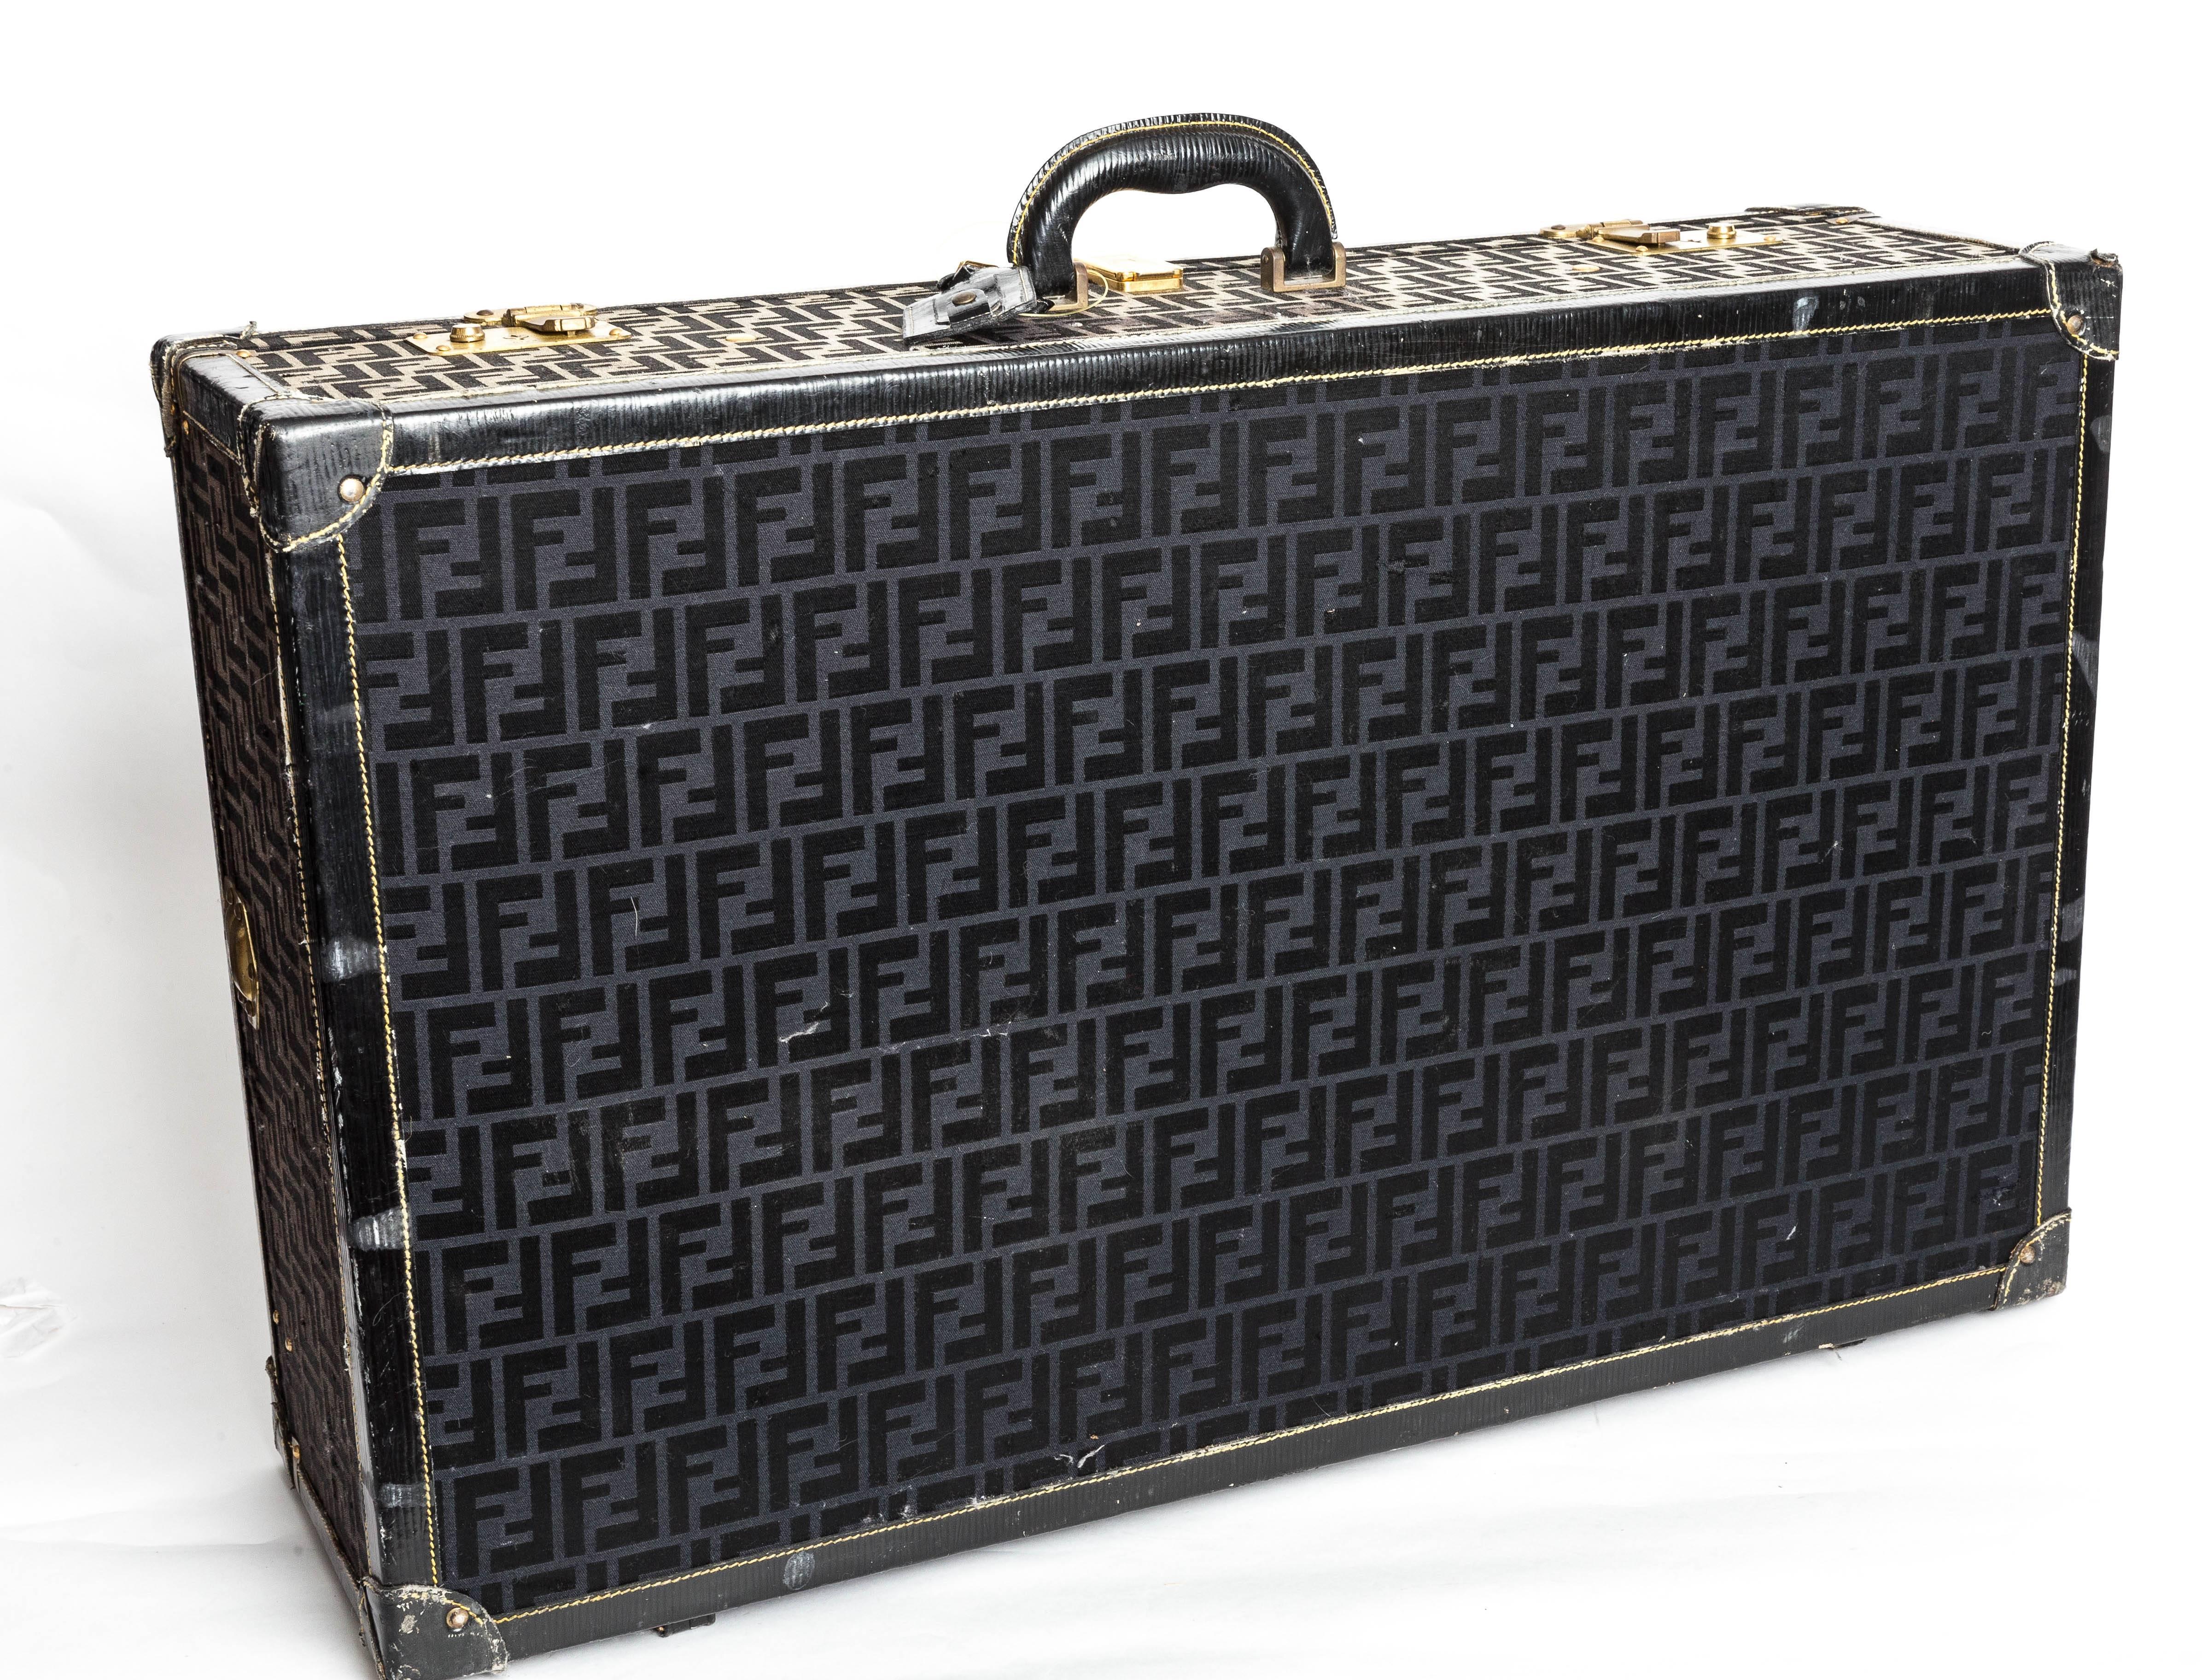 Travel in style with this sturdy travel piece from Fendi. Made in the early 1980s, this hard-sided suitcase can also be used for interior design! It features a logo-embossed interior with two leather straps for securing clothing. The exterior is